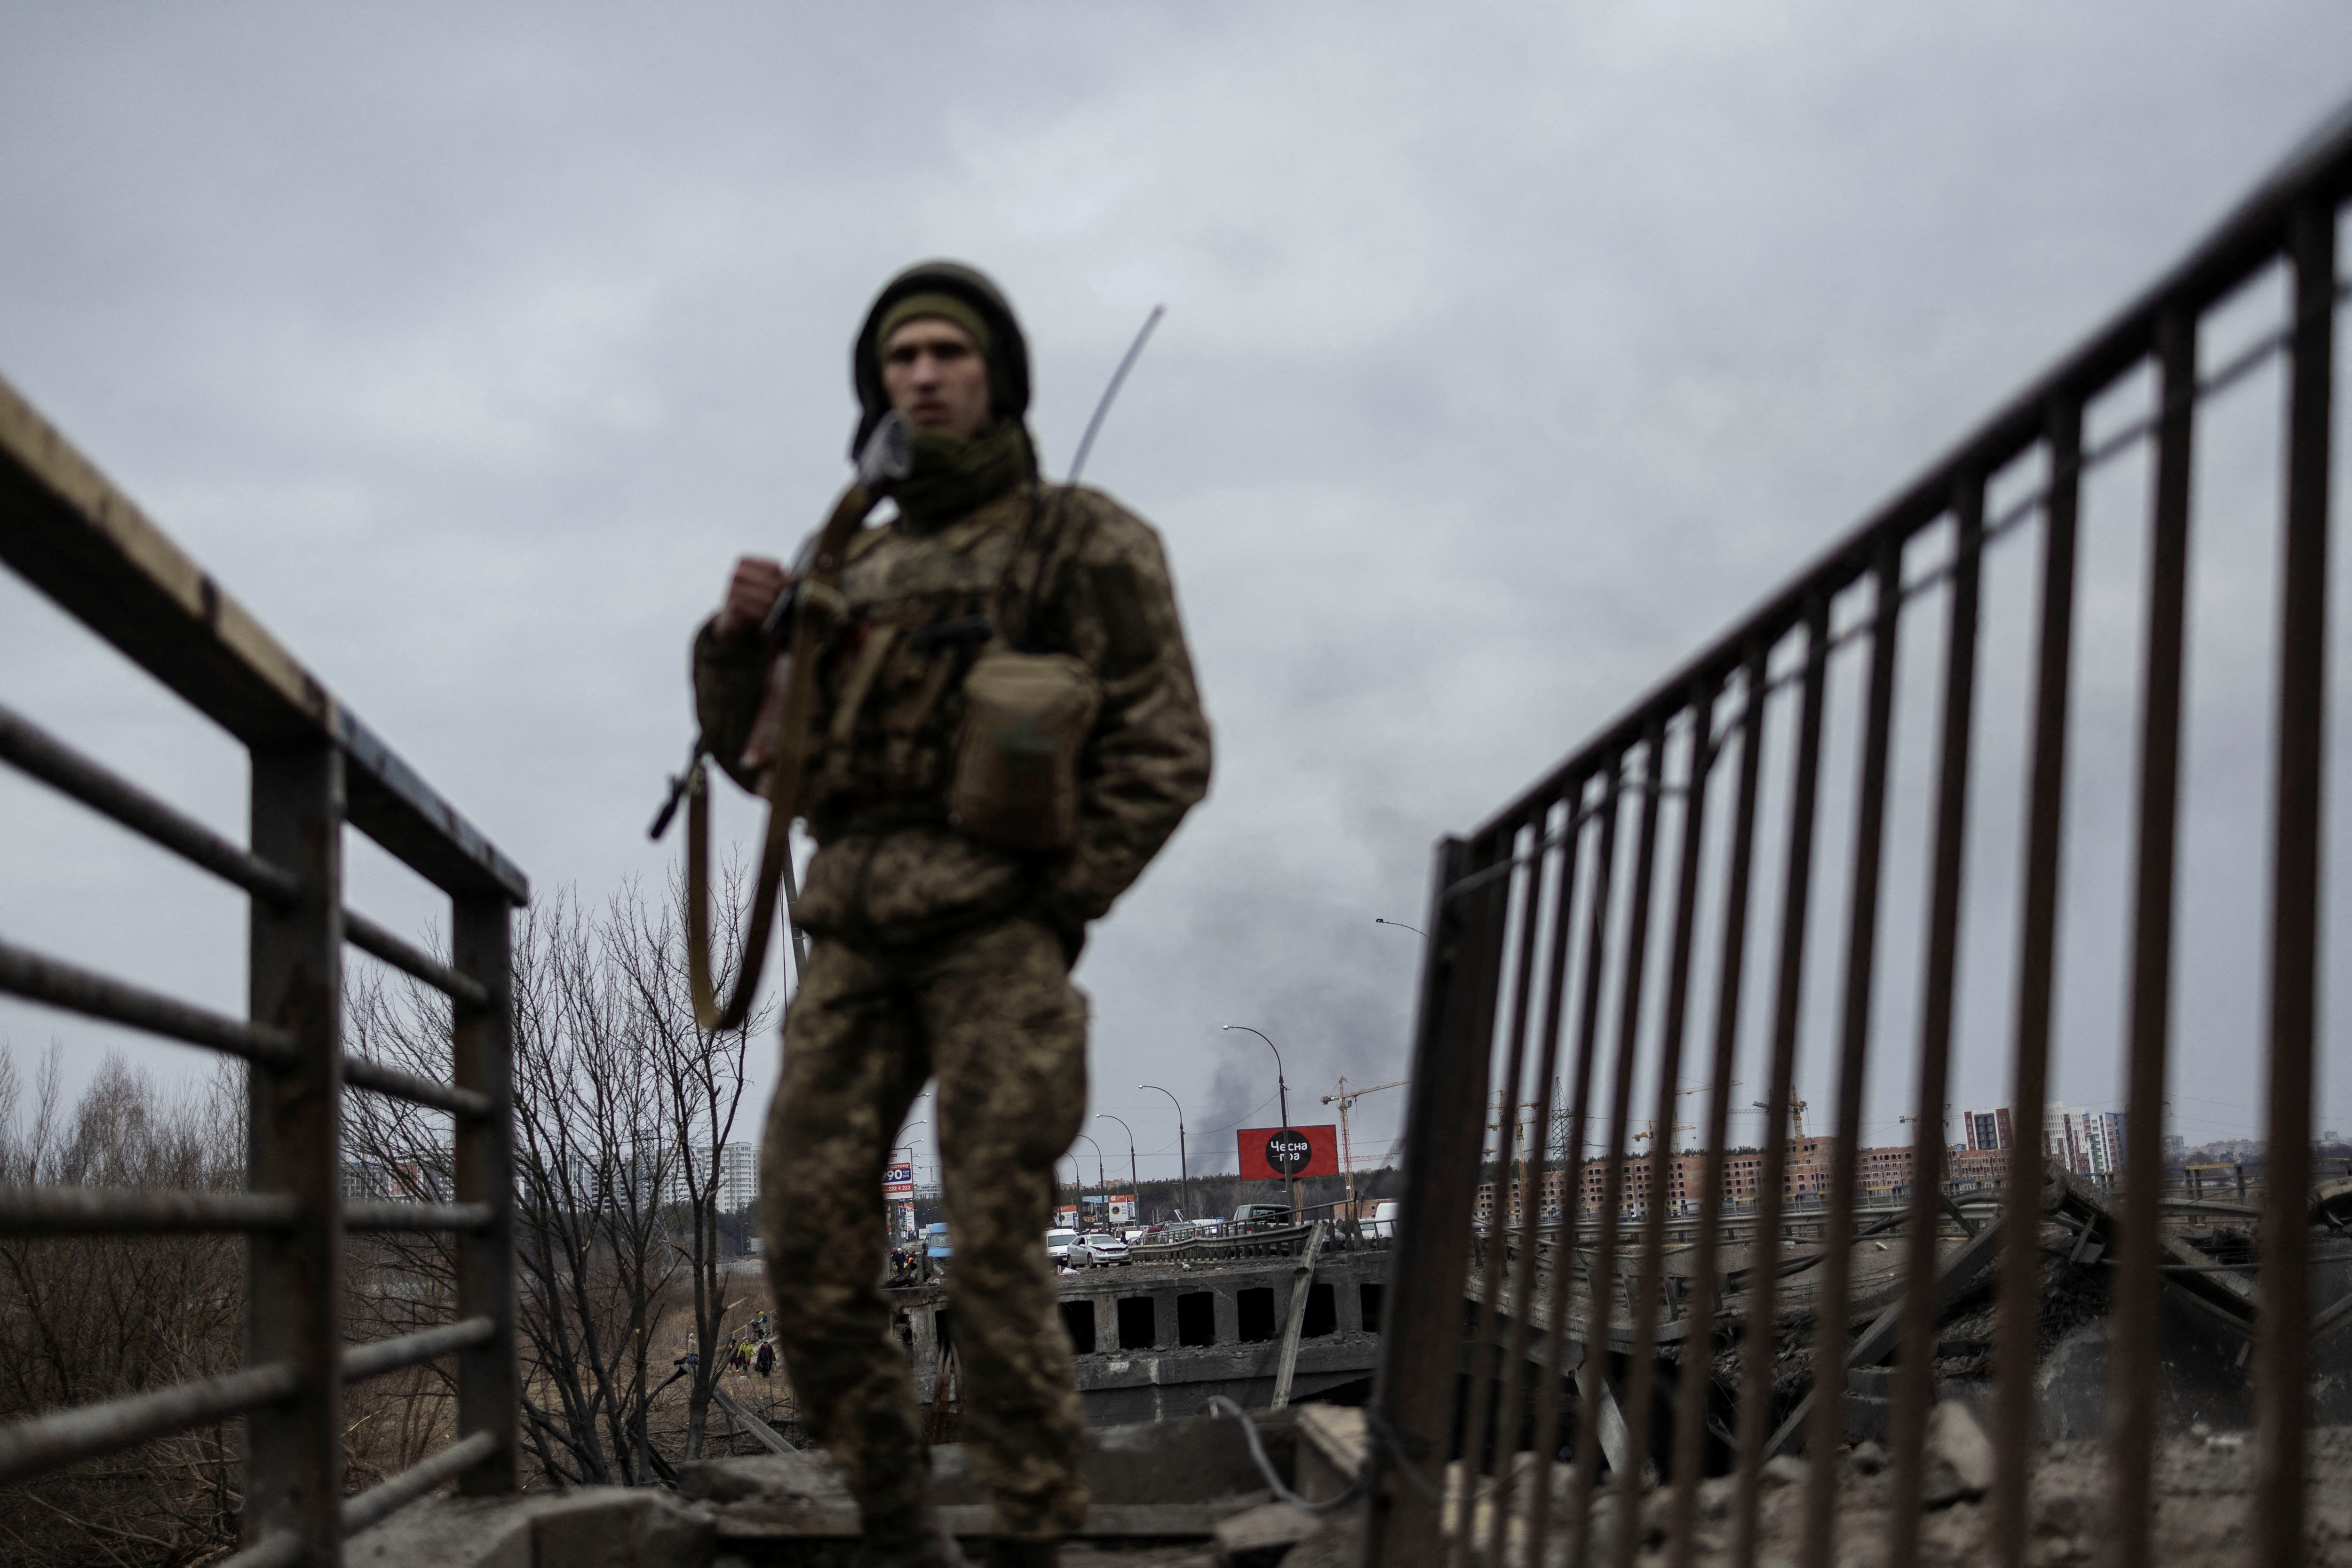 Smoke rises as a service member of the Ukrainian armed forces stands by the only escape route used by locals to evacuate from the town of Irpin, after days of heavy shelling, while Russian troops advance towards the capital, in Irpin, near Kyiv